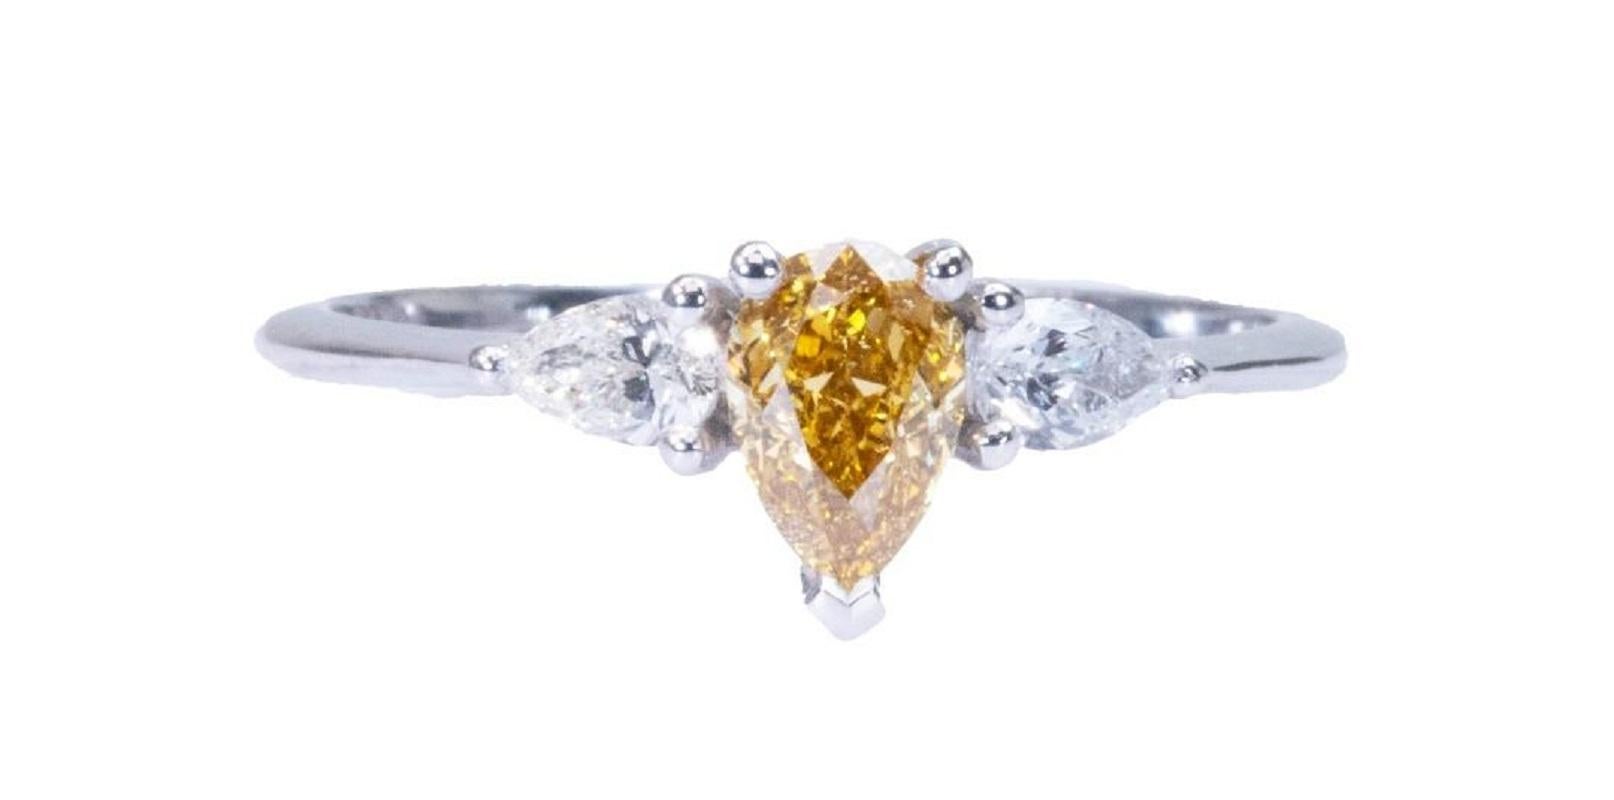 Stunning and one of a kind 3 stone ring made from 18k white gold with 0.77 total carat of natural pear shape diamond with amazing brownish yellow color with 2 pear shape diamonds on the side. This ring comes with an AIG certificate and a fancy